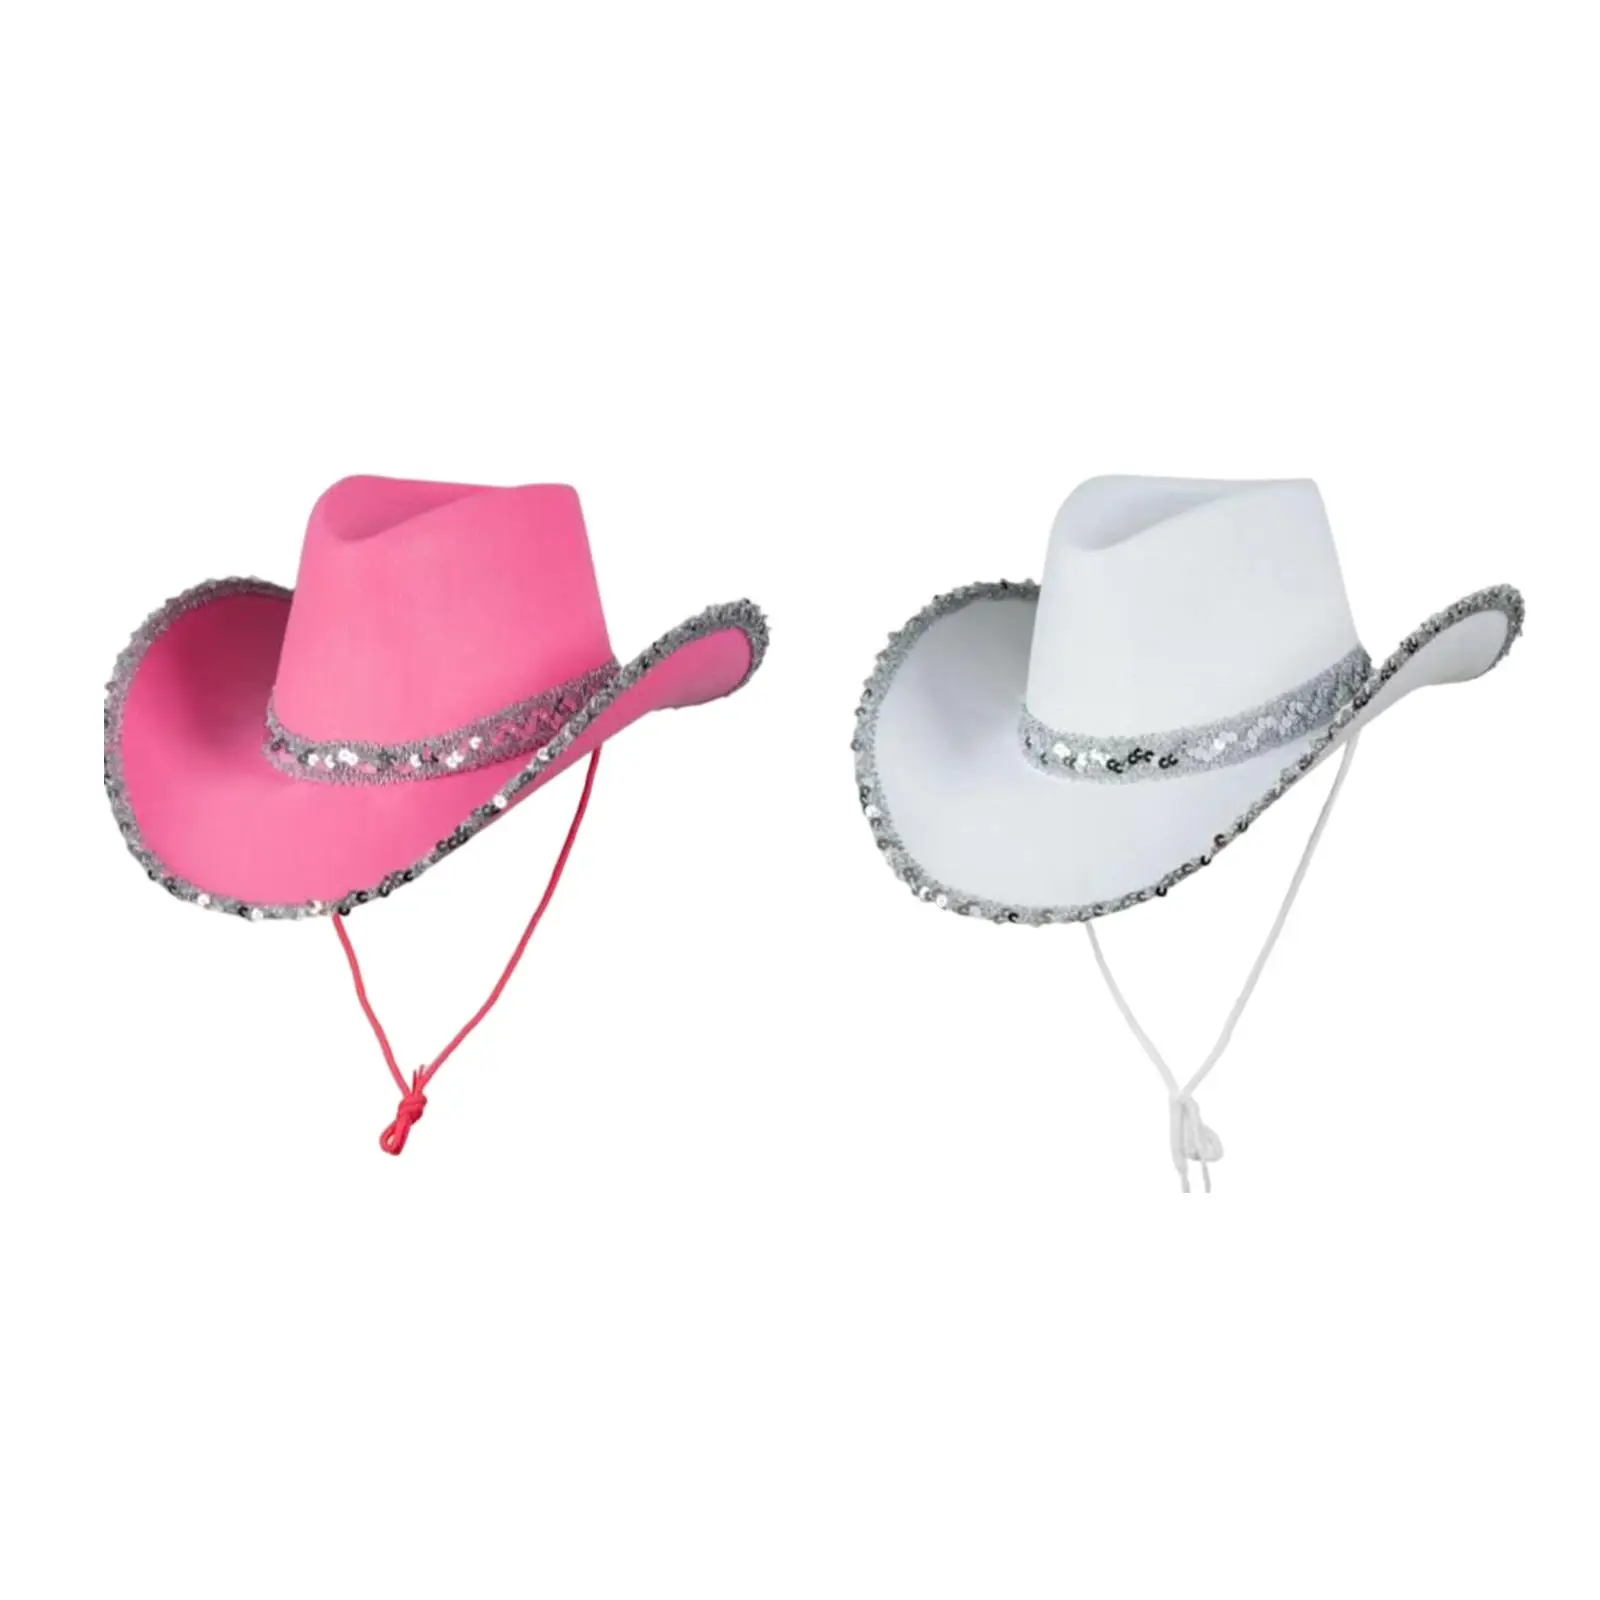 Western Women Cowboy Hat Wide Brim Sequin Edge Sunhat Cowgirl Hats for Engagement Party Wedding Fancy Dress Costume Role Play